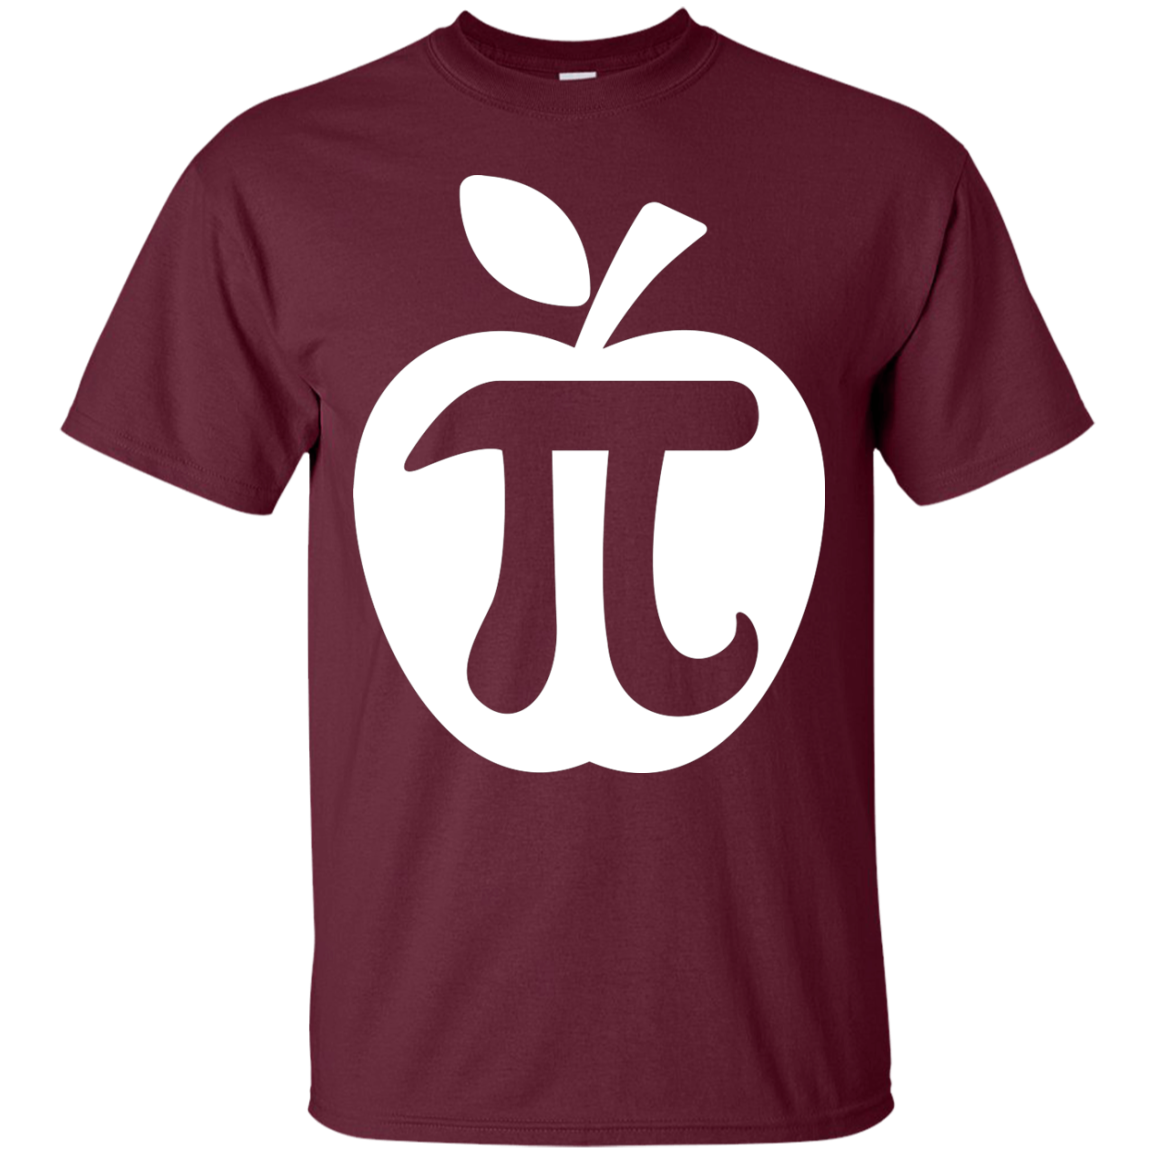 Apple Pi – Engineering Outfitters